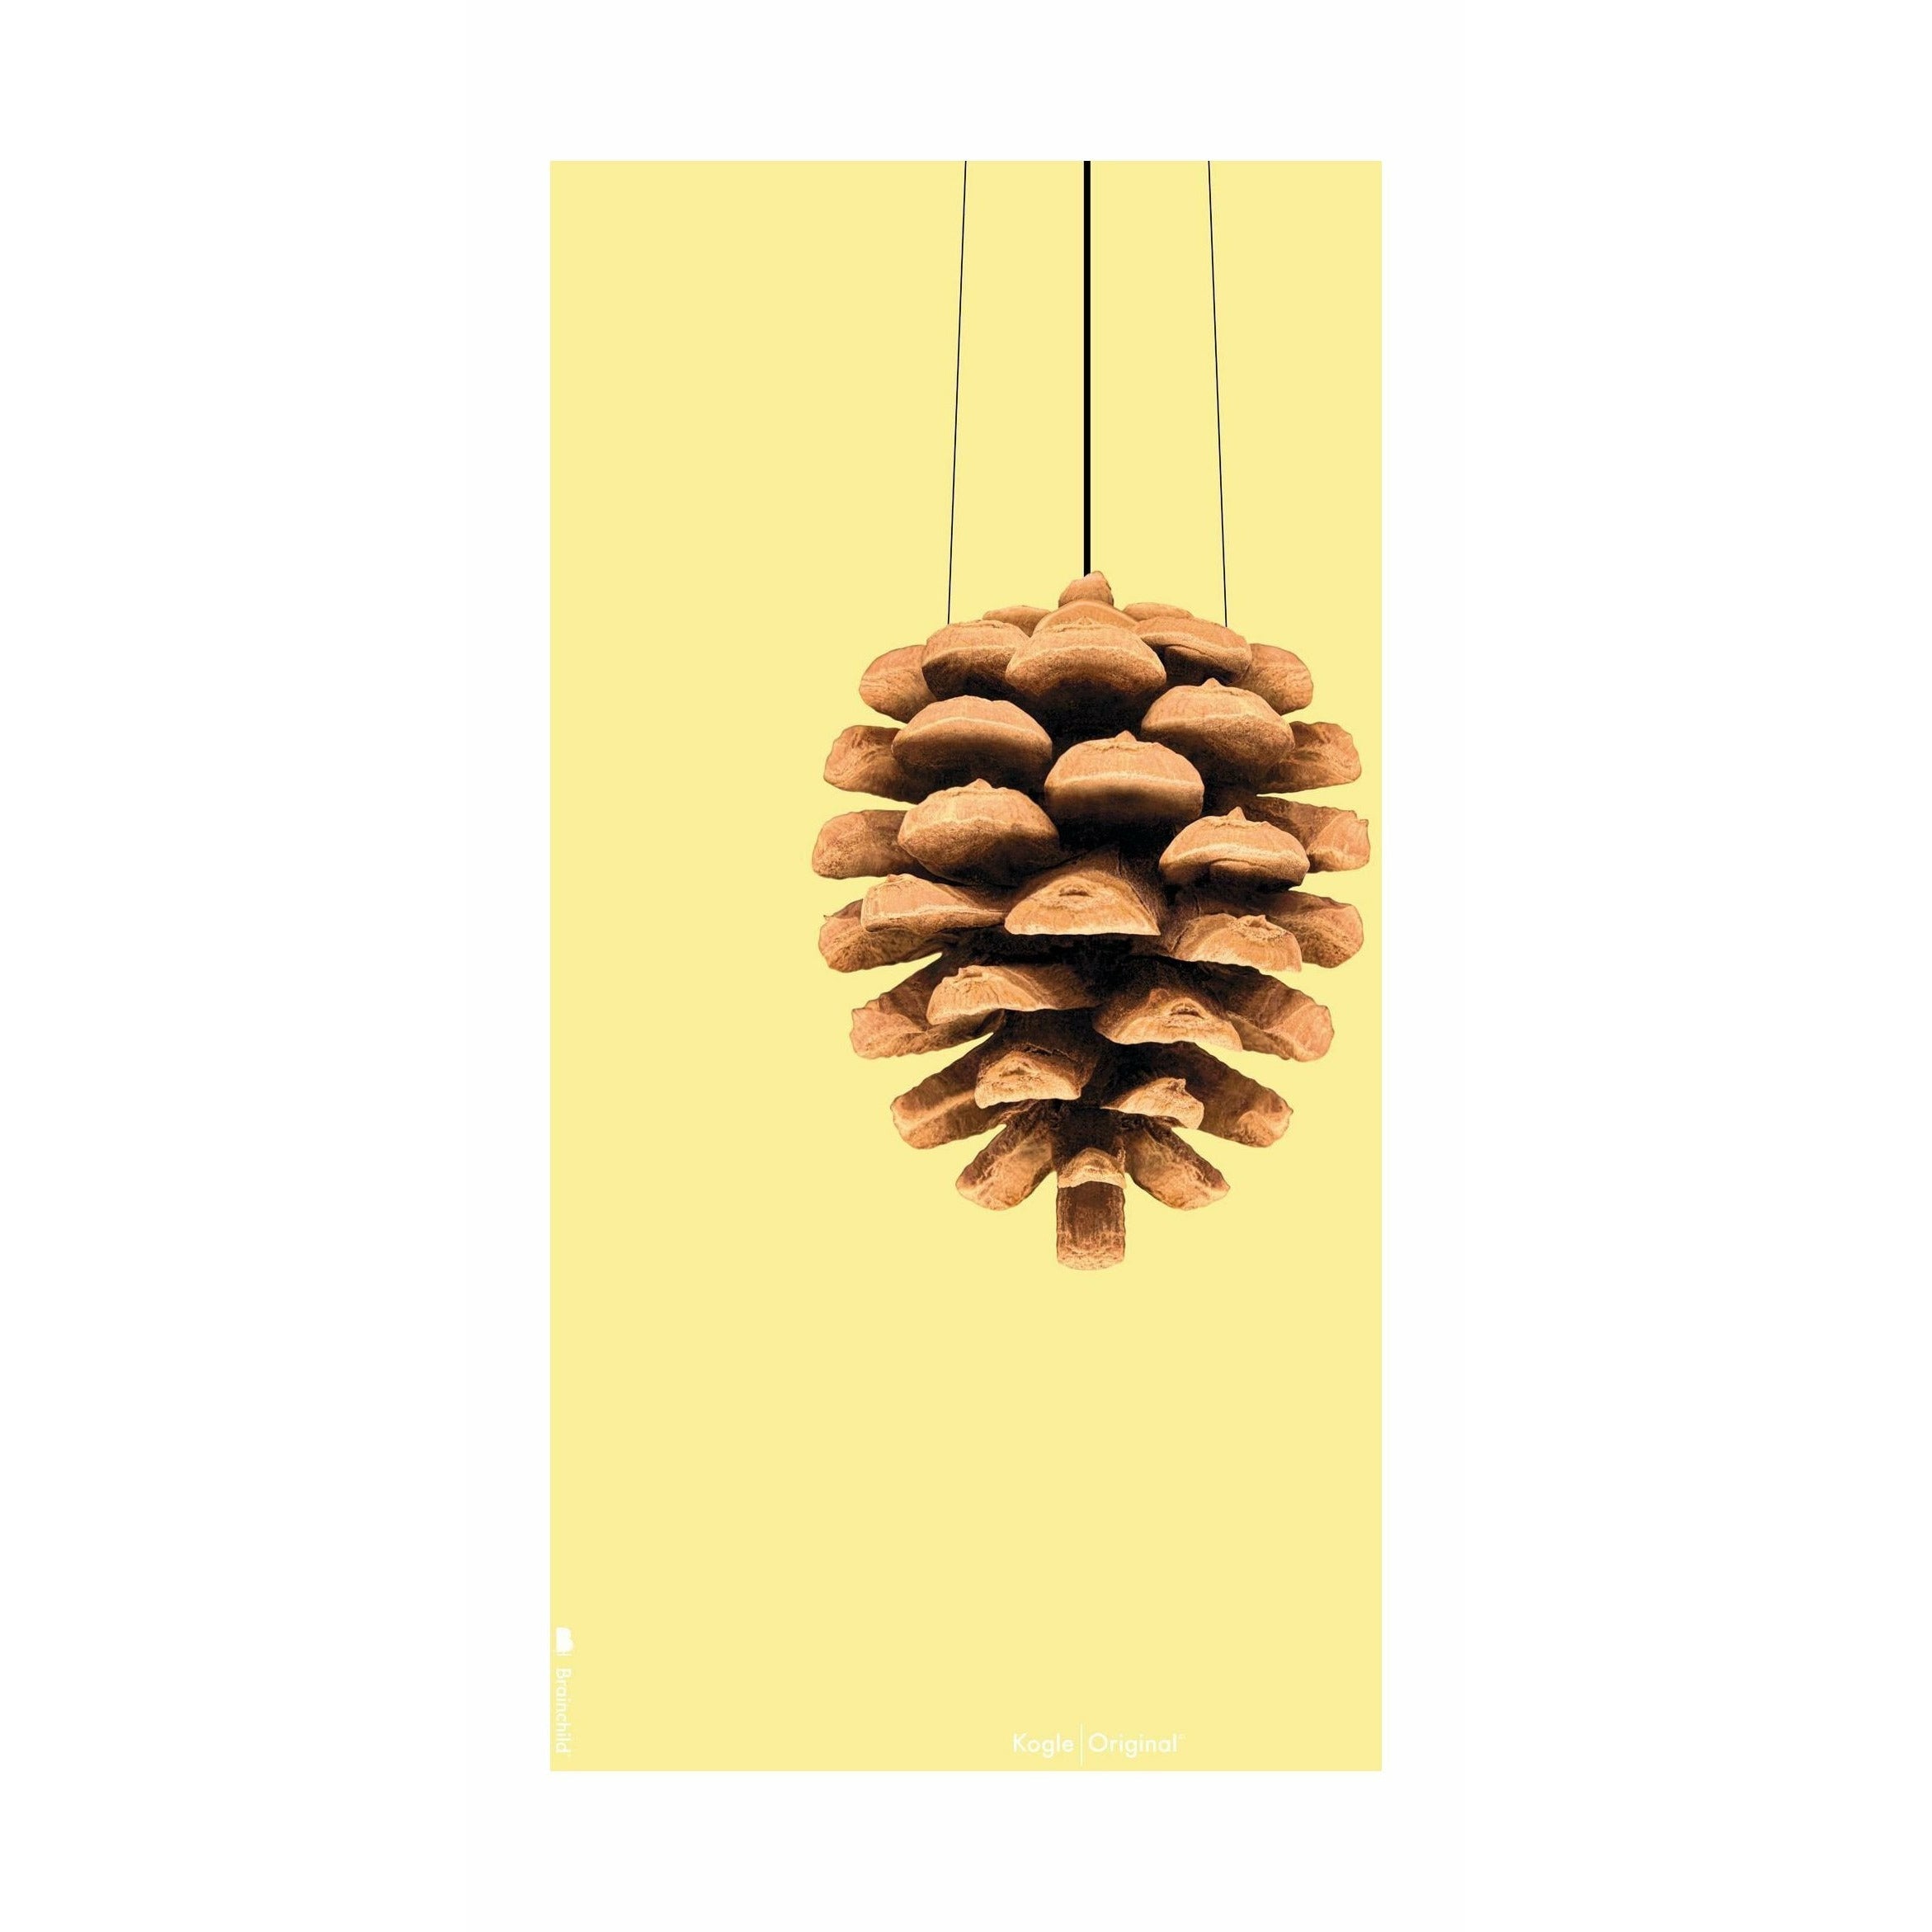 Brainchild Pine Cone Classic Poster Without Frame A5, Yellow Background